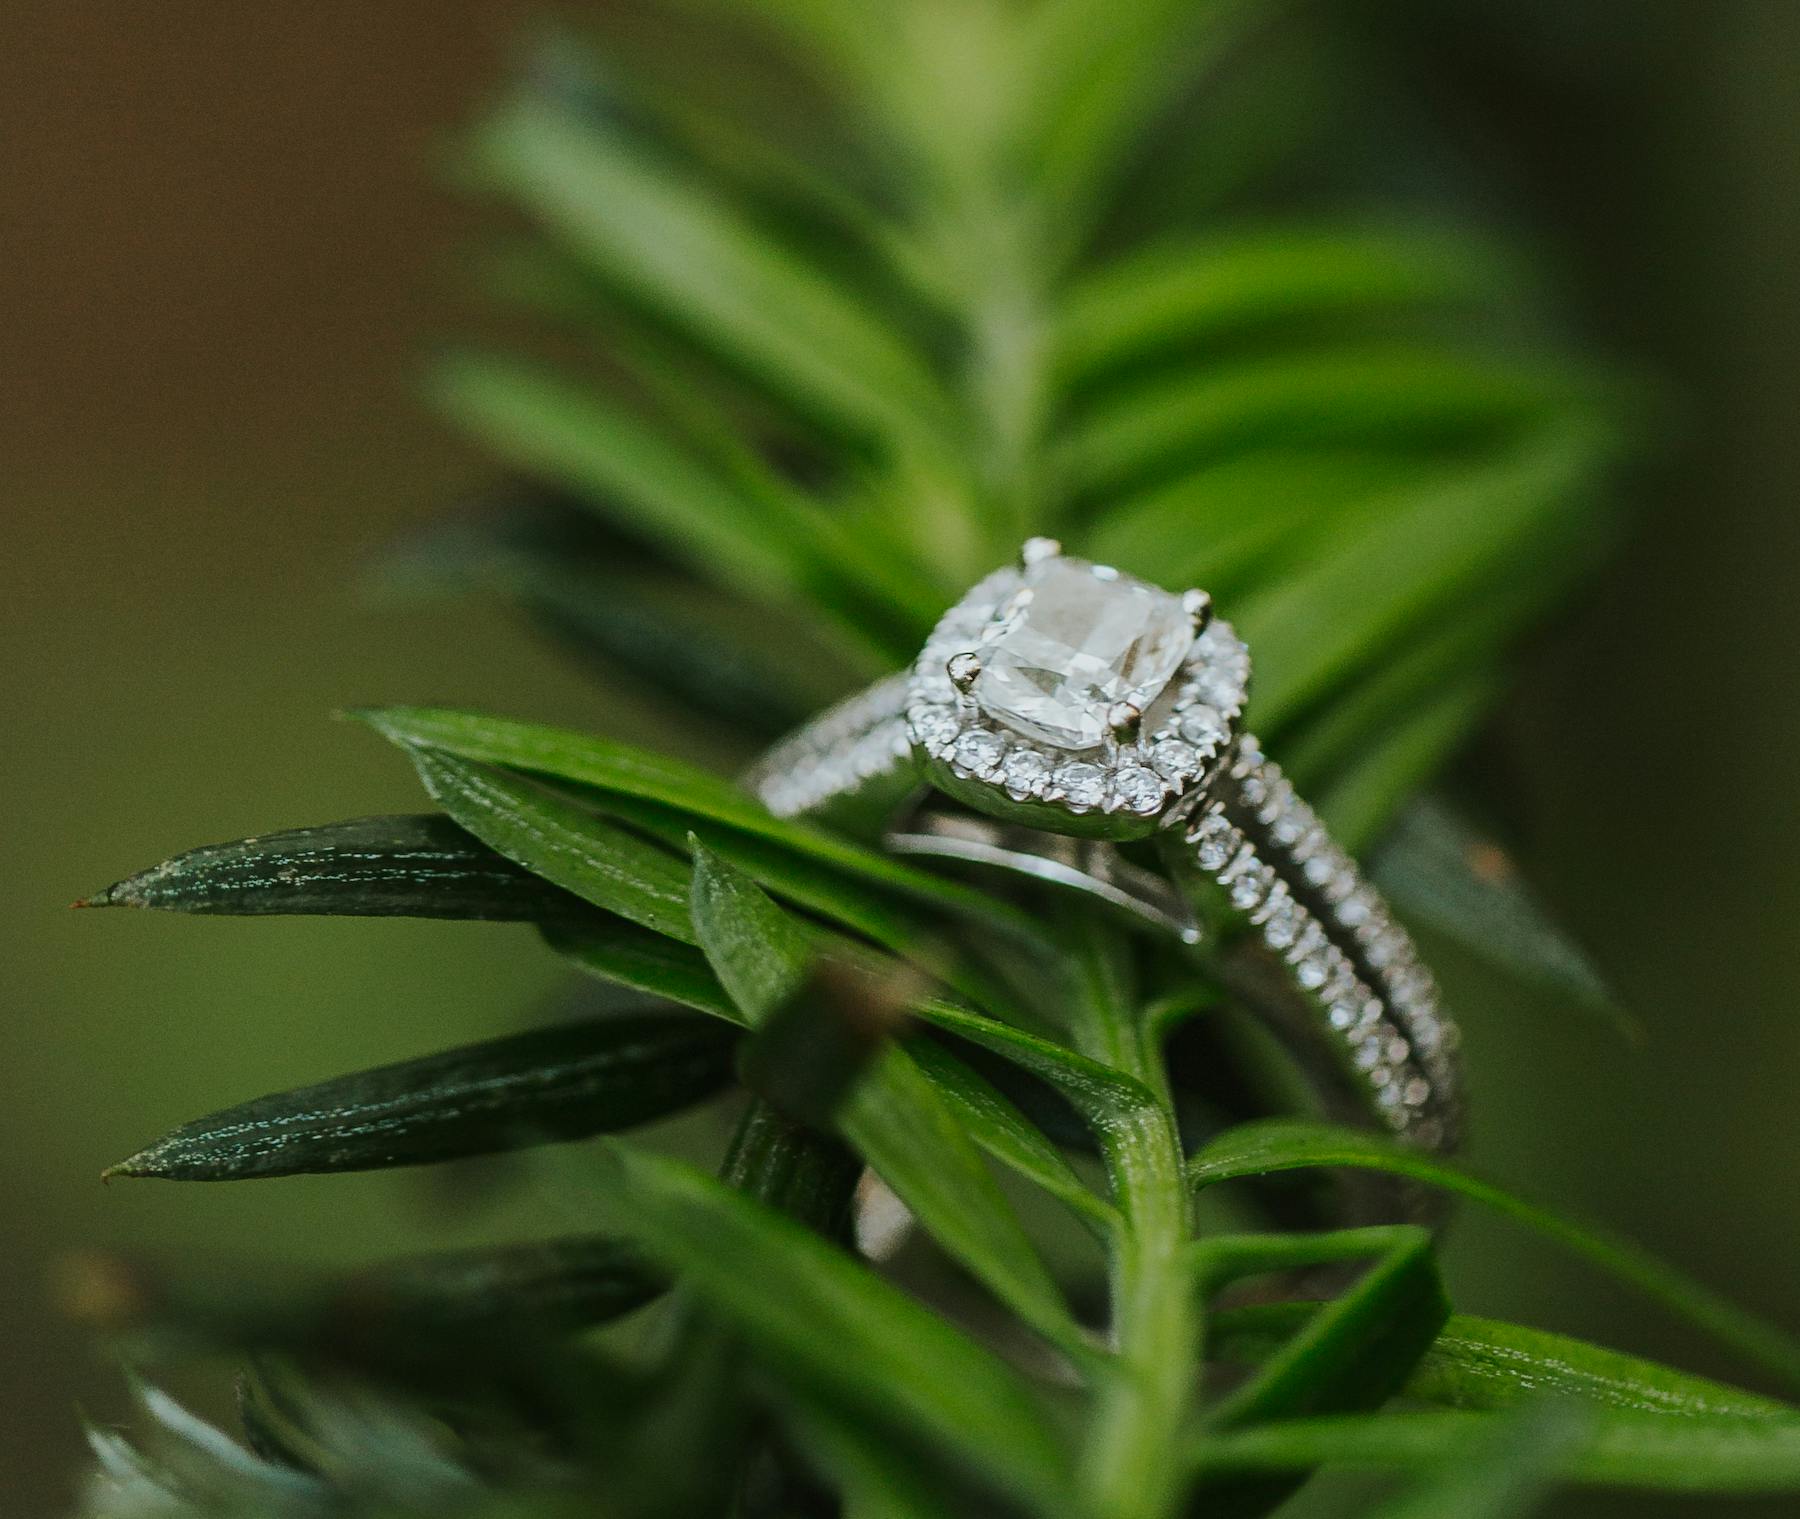 Heather's engagement ring resting on a vine